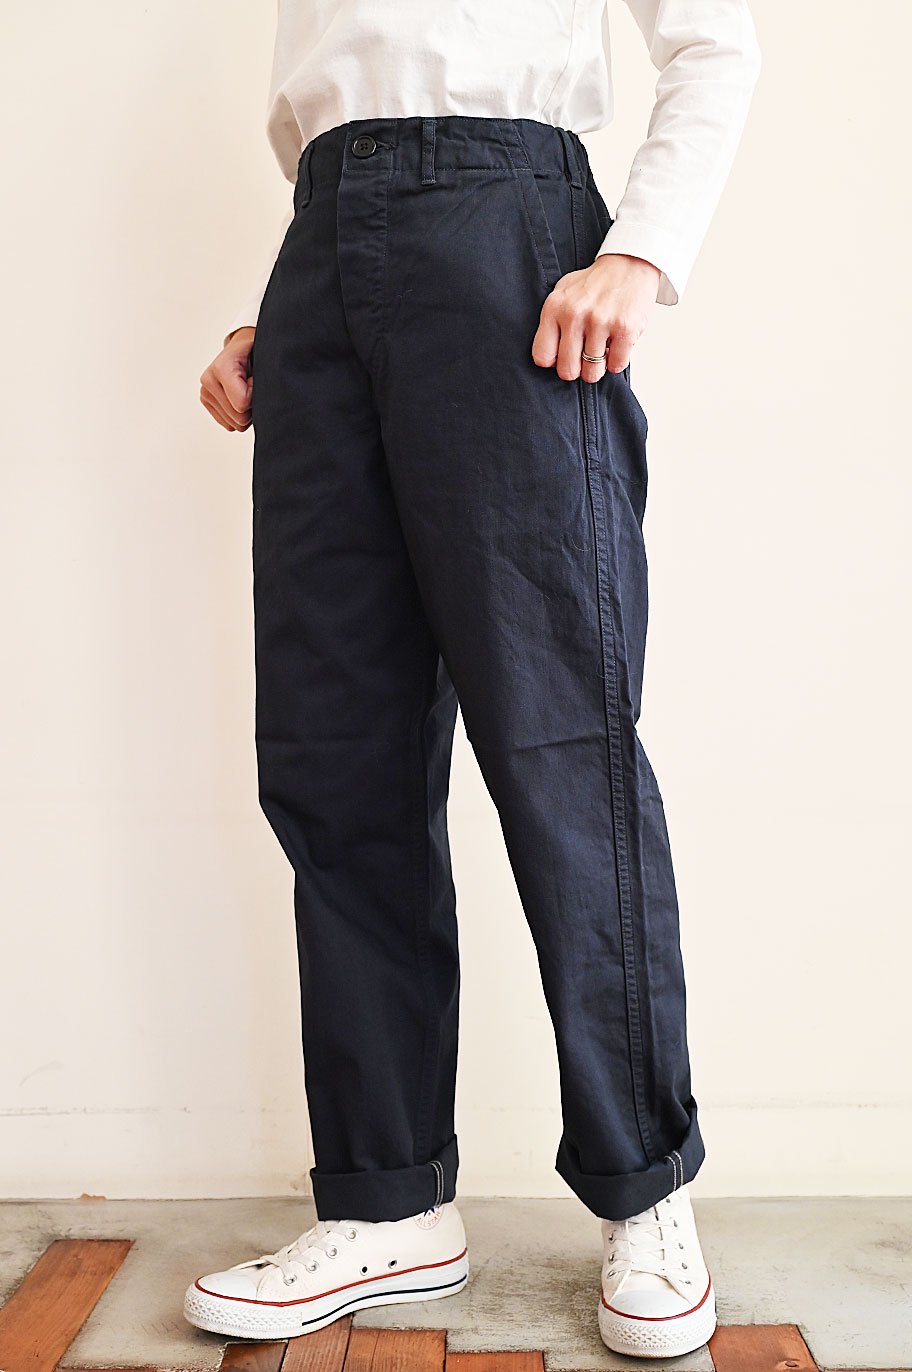 orslow　フレンチワークパンツ NAVY － orslow - TONE Online Shop